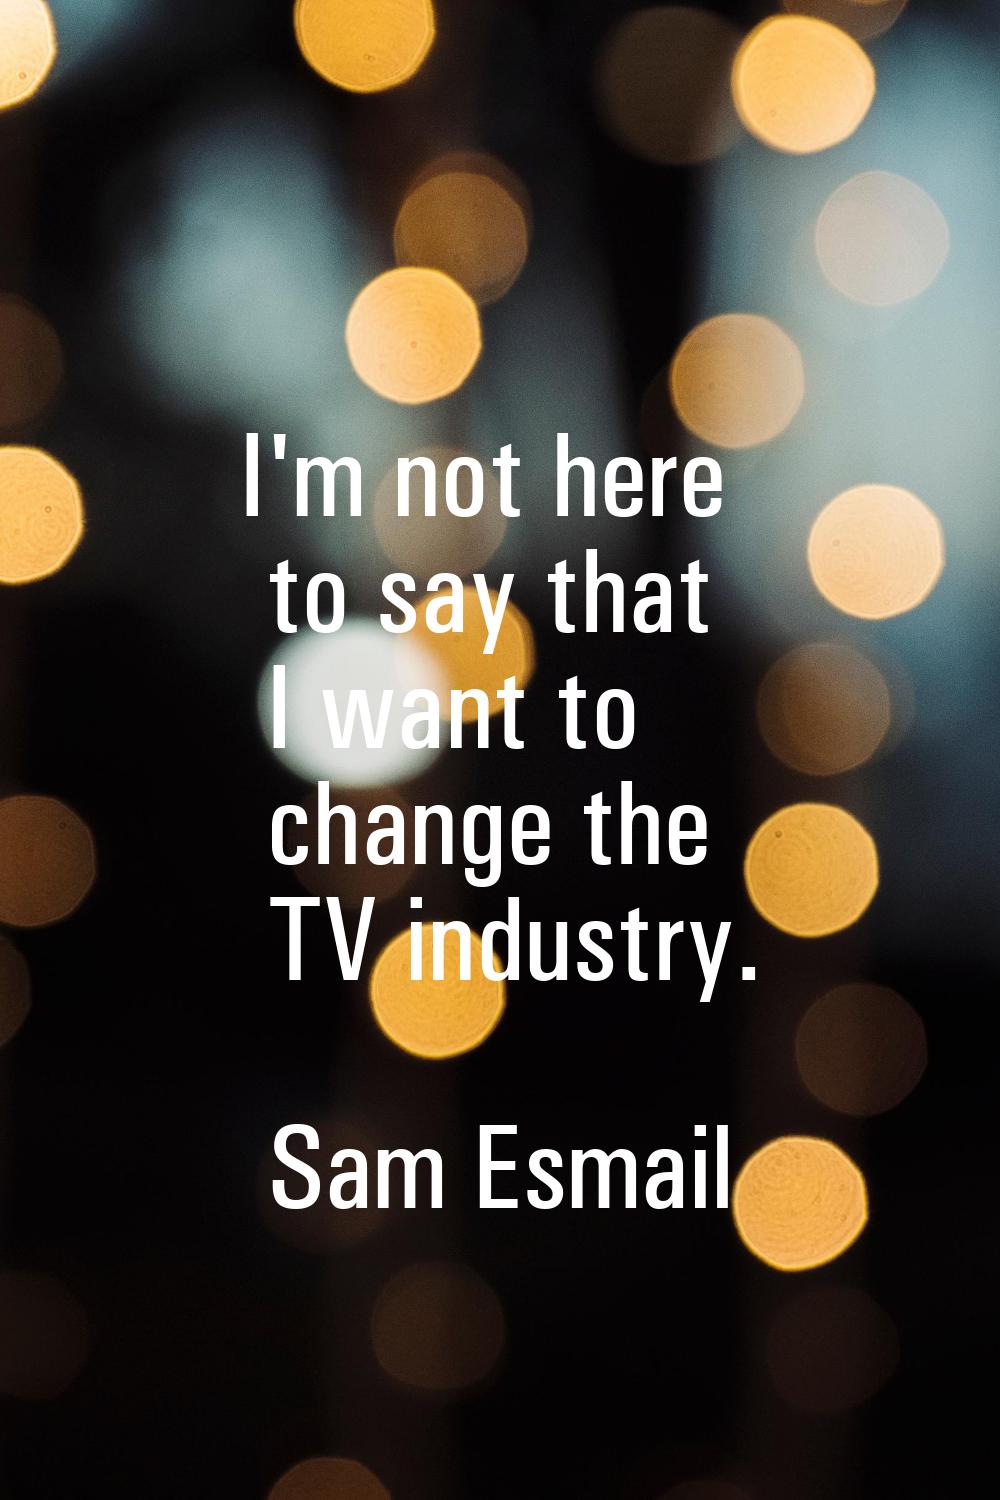 I'm not here to say that I want to change the TV industry.